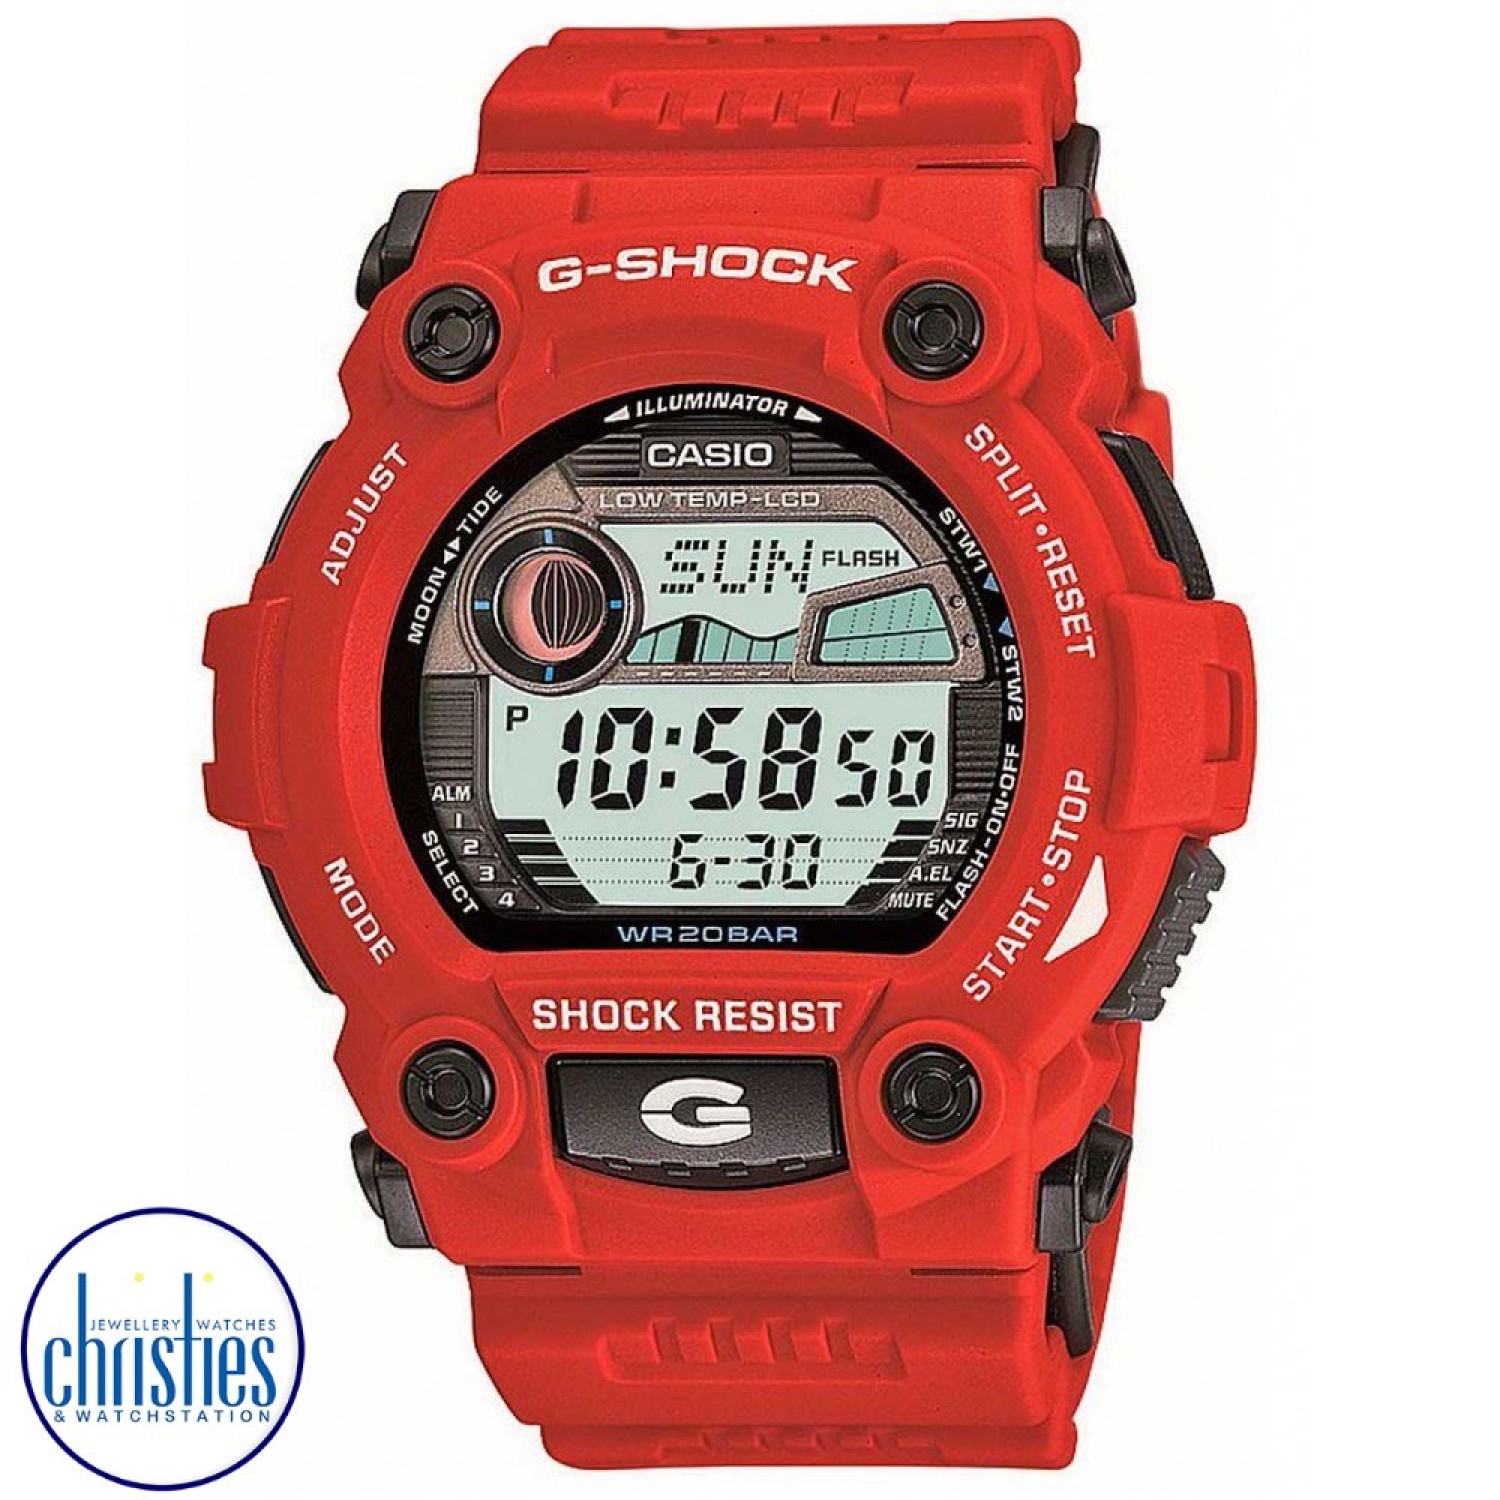 G7900A-4D G-Shock Fishing Moon data Watch. Major features include four large bezel screws and protruding surfaces that divide the form of the watch into six sections for a fashionable design. Buttons are among some of the largest available in the G-SHOCK 